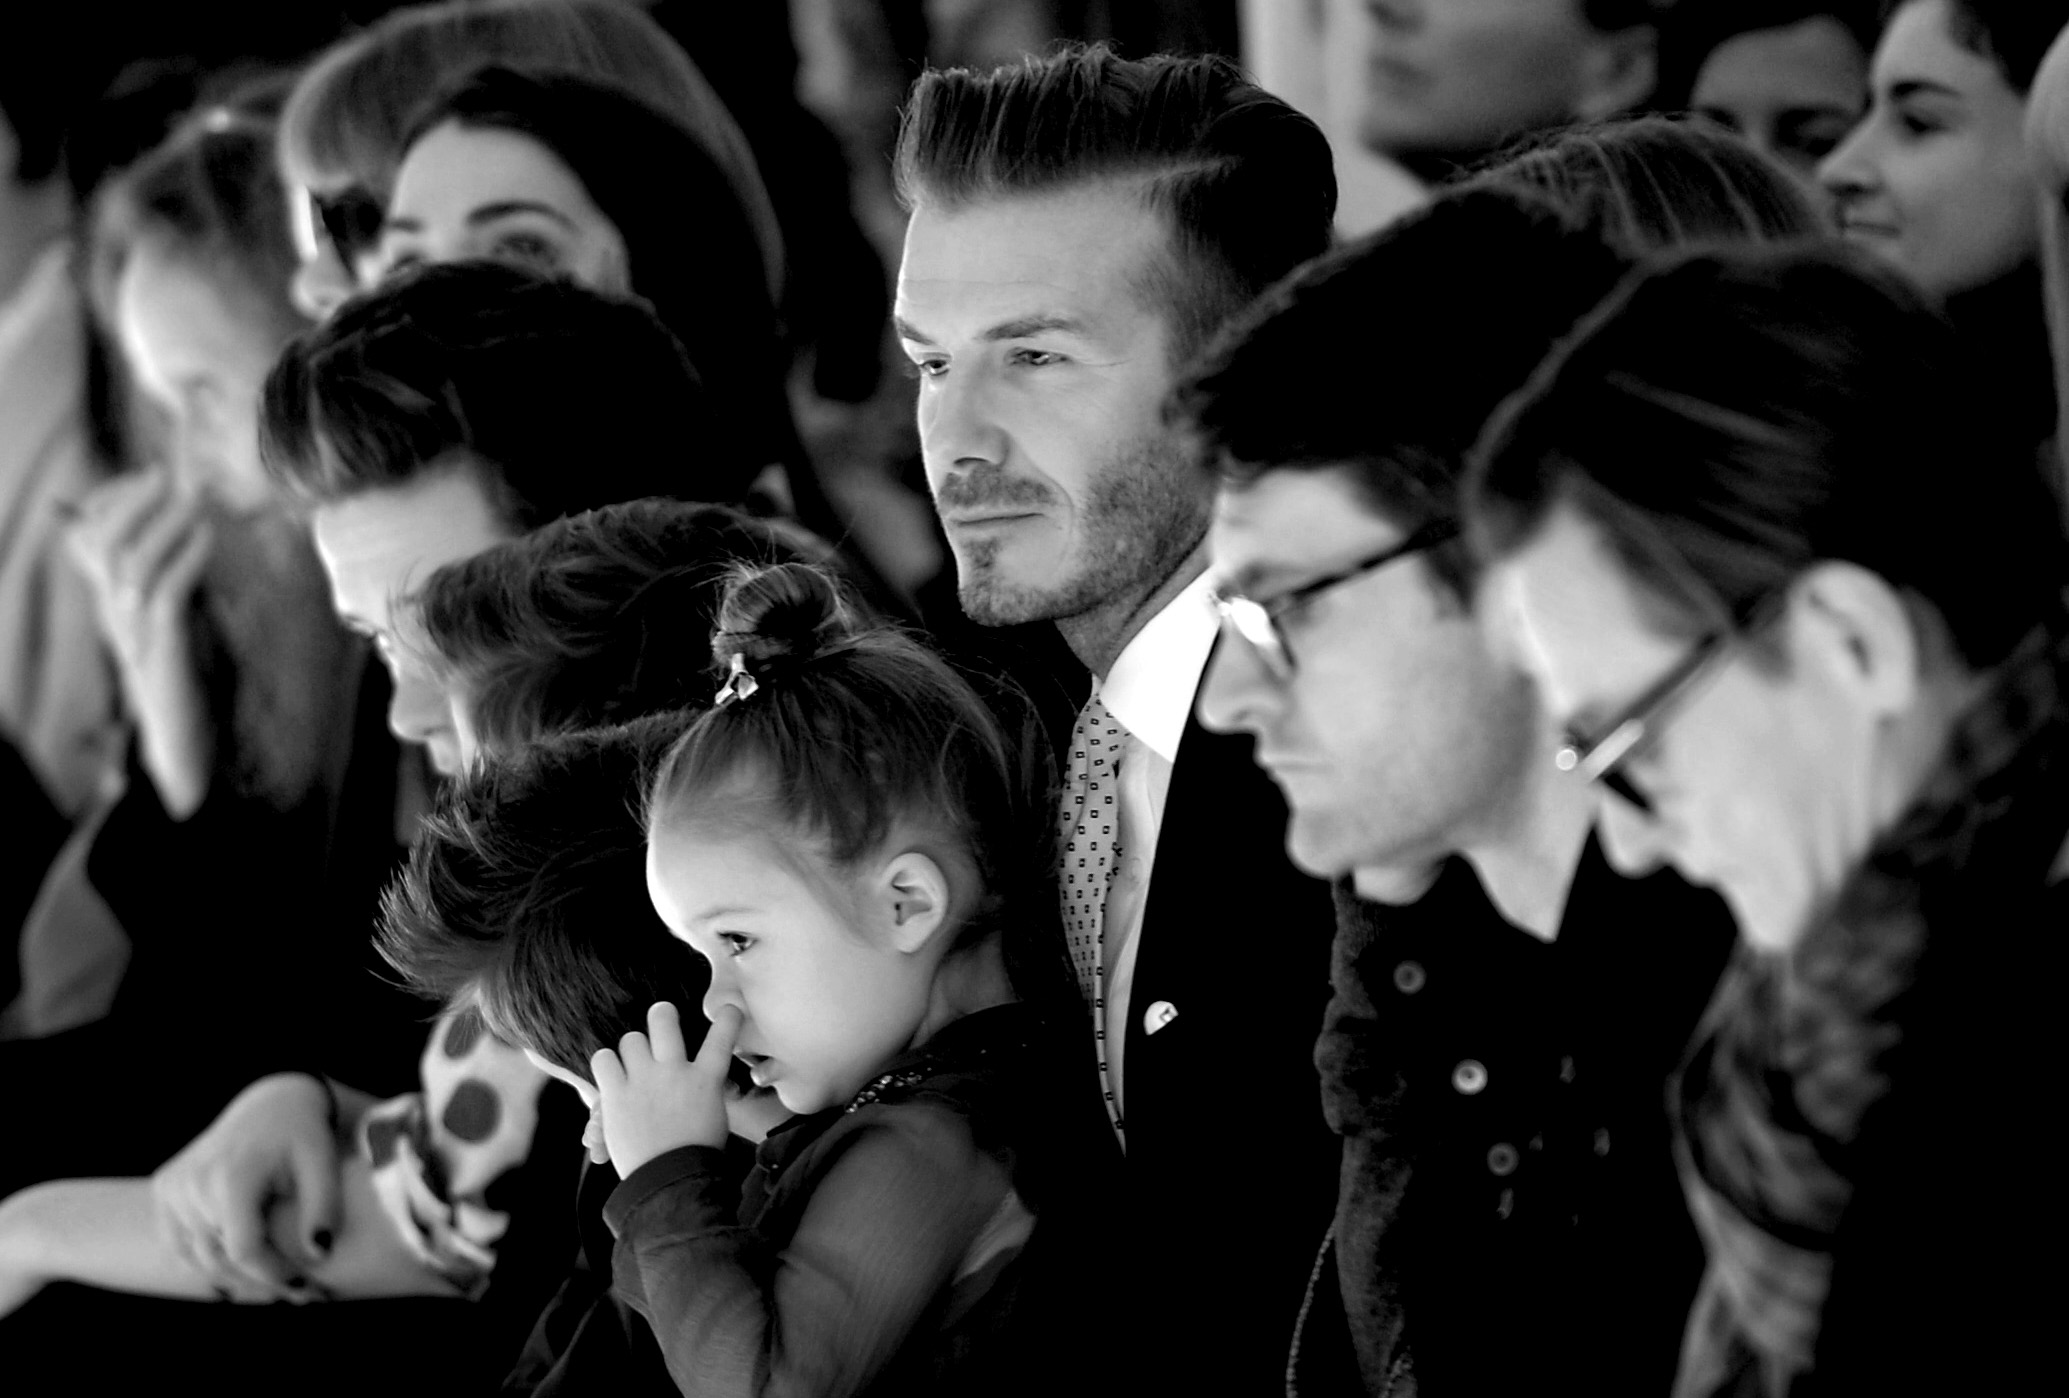 Soccer great David Beckham with his daughter Harper look on as models present the fashions of Victoria Beckham during the Mercedes-Benz Fashion Week Fall/Winter 2014 shows February 9, 2014 in